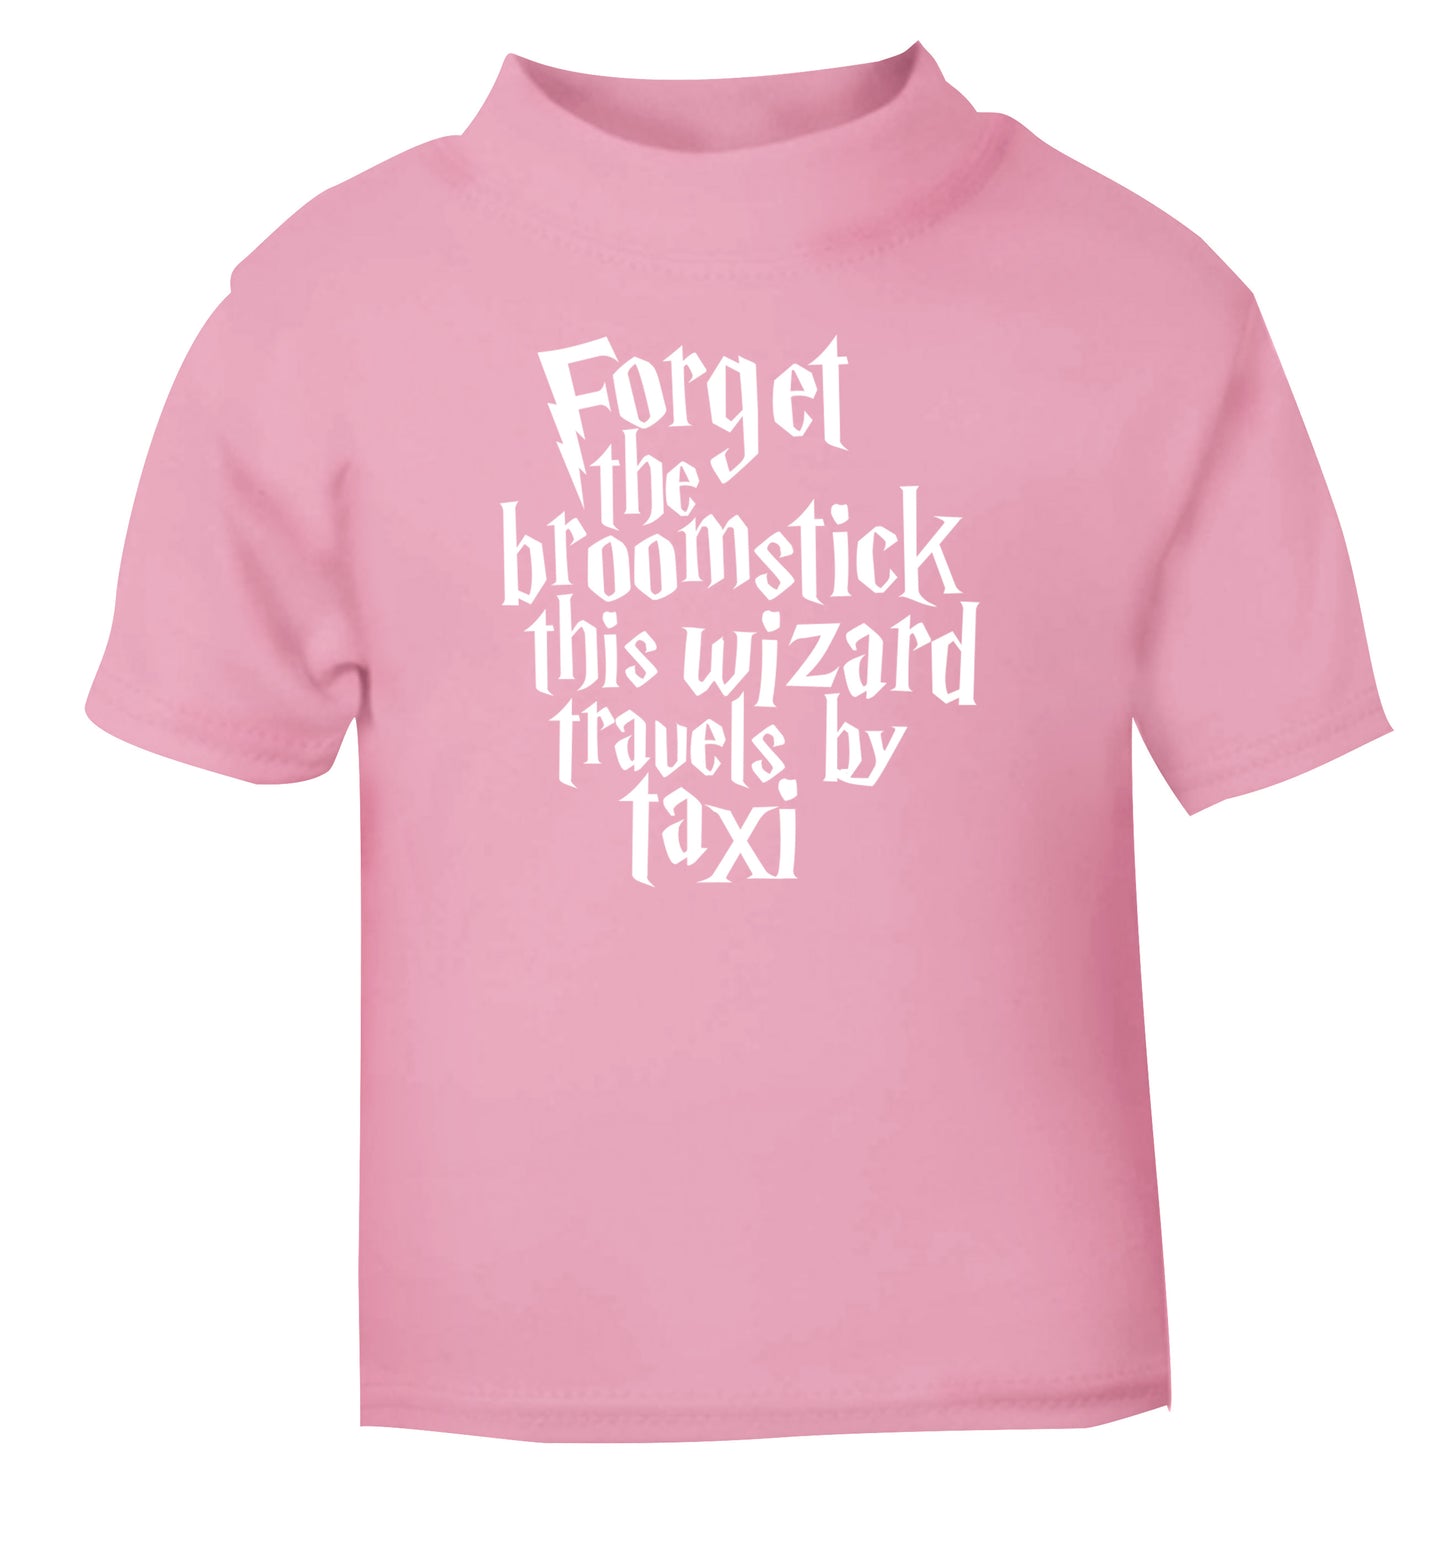 Forget the broomstick this wizard travels by taxi light pink Baby Toddler Tshirt 2 Years